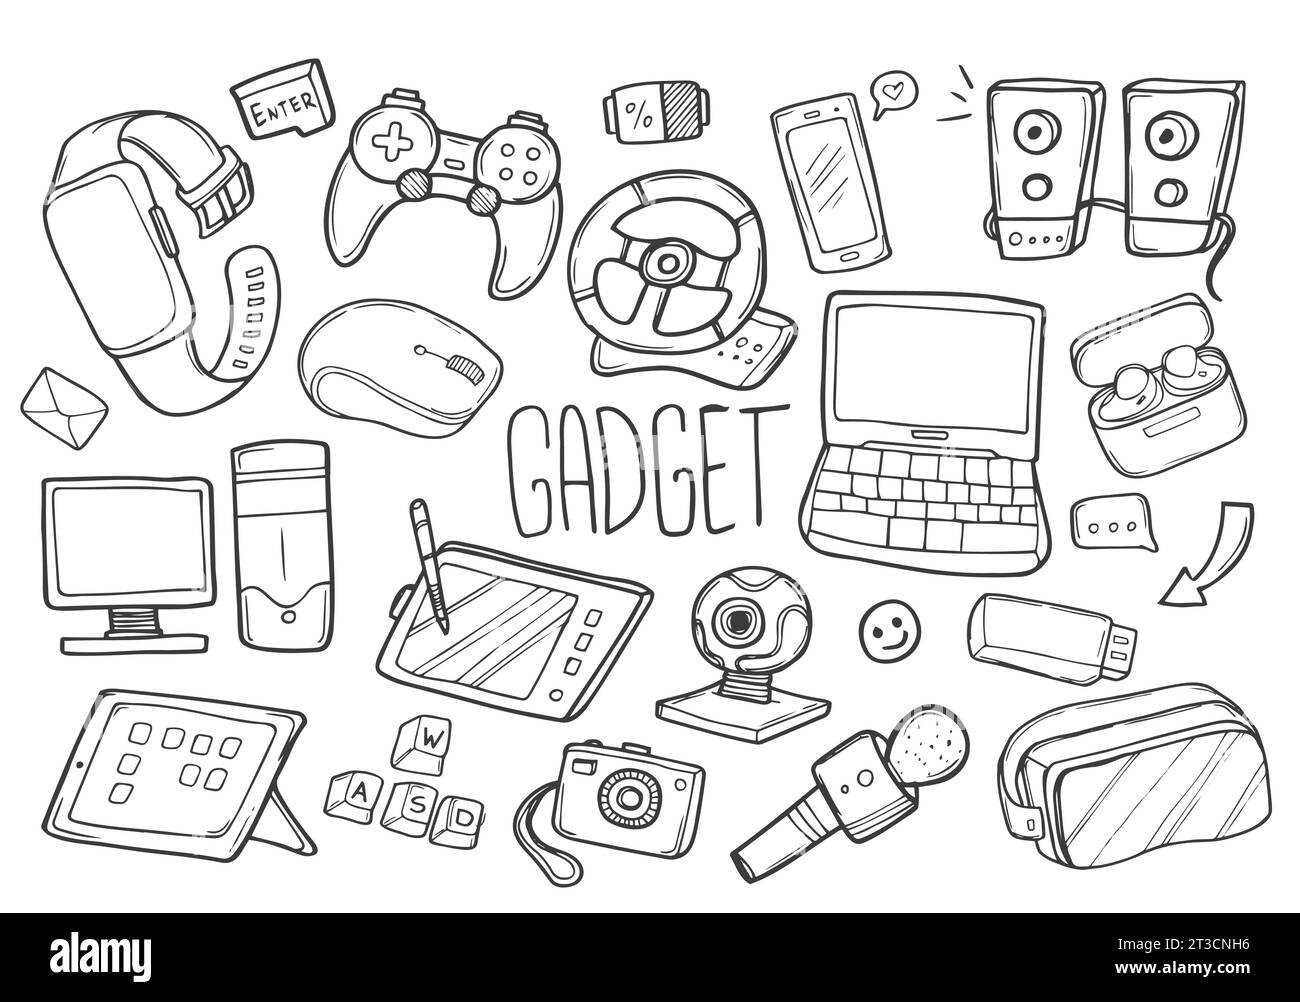 Gadgets Computer Tools Traditional Doodle Icons Sketch Hand Made Design Vector. Stock Vector